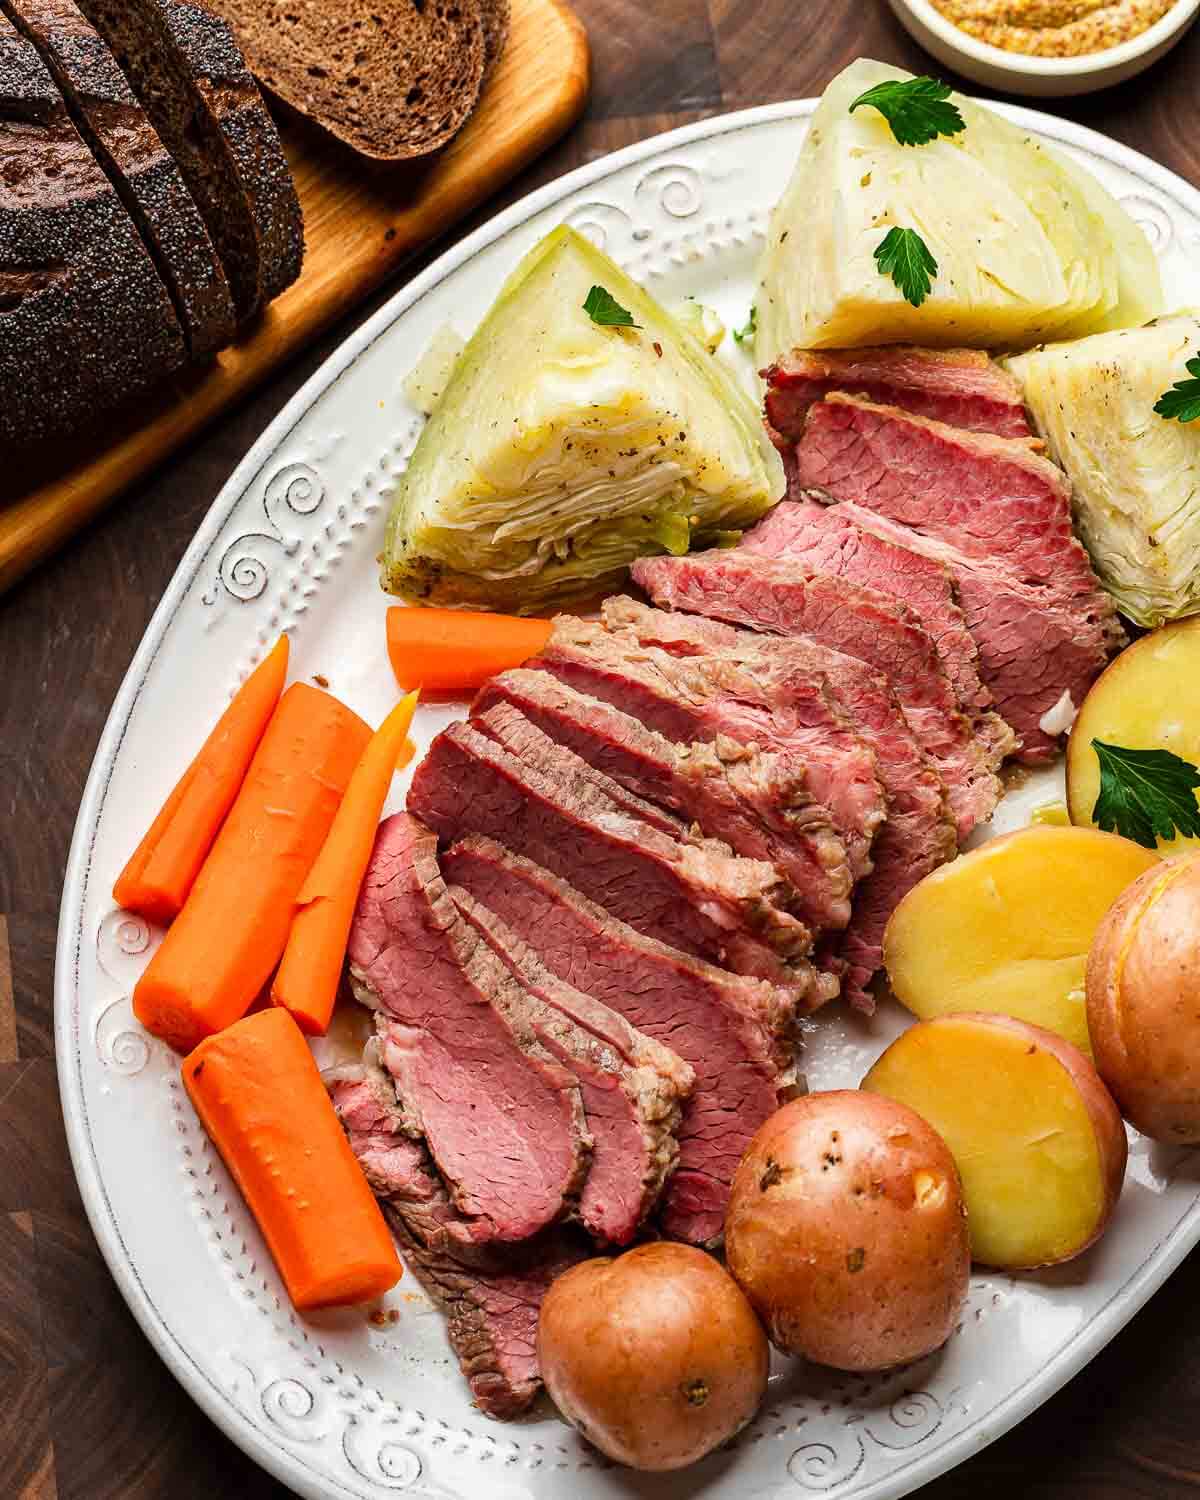 Overhead shot of platter with corned beef, cabbage, potatoes, and carrots with loaf of brown bread.